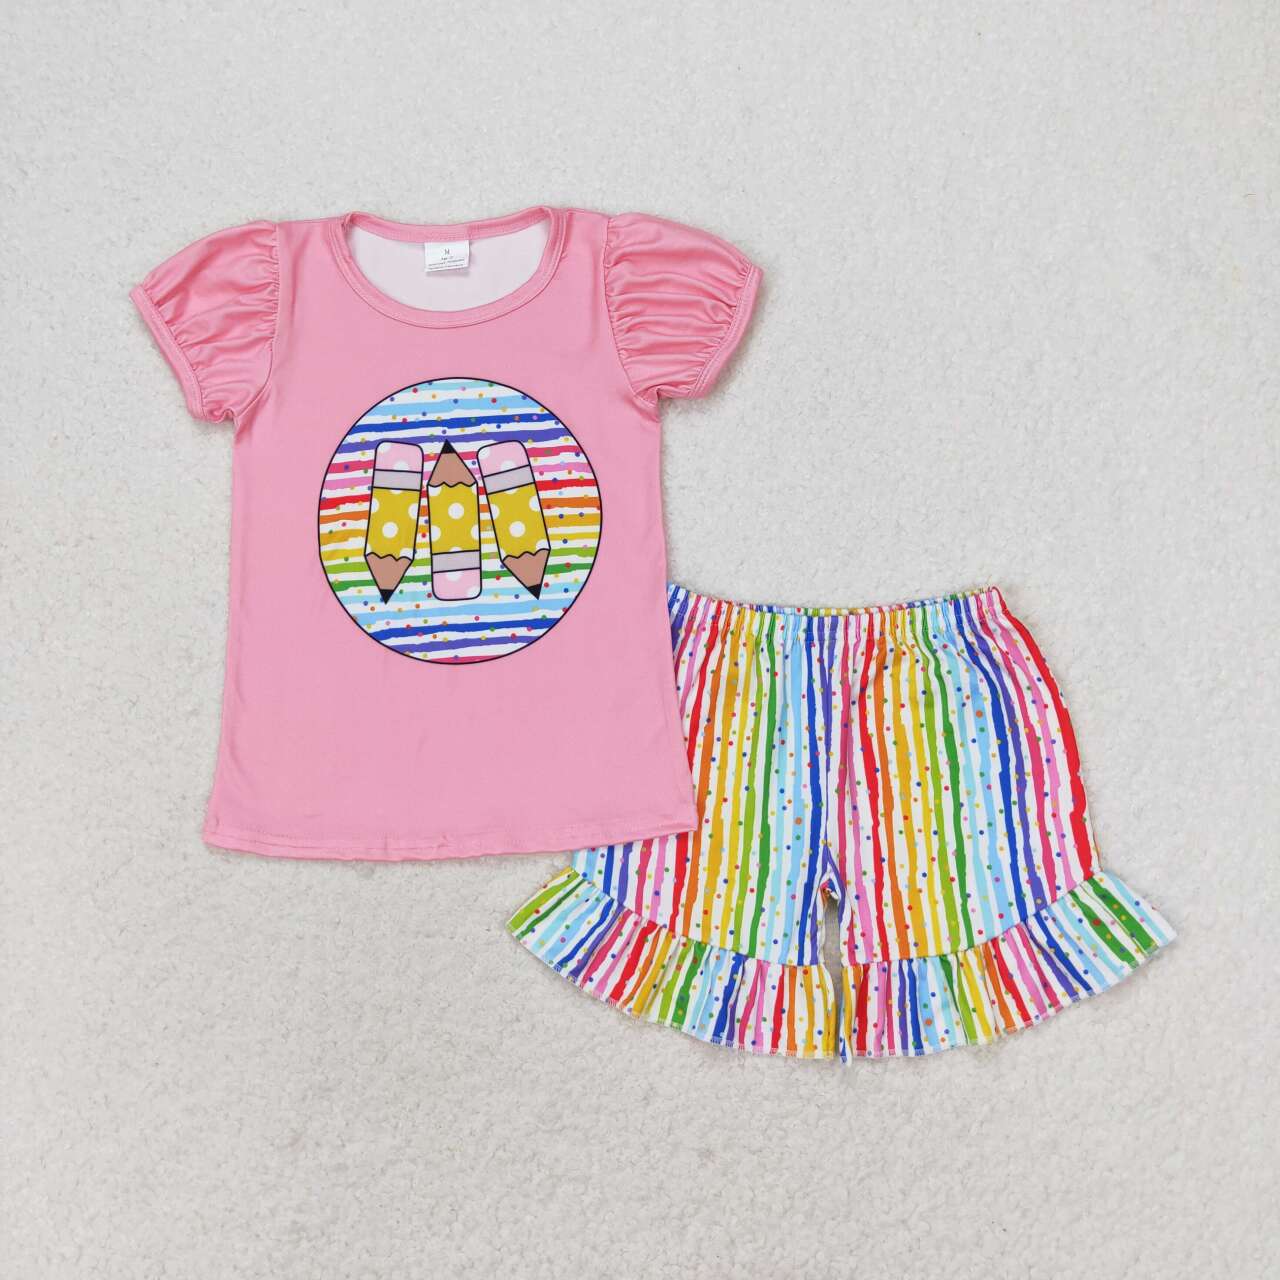 GSSO1366 Pen Pink Top Rainbow Stripes Shorts Girls Back to School Clothes Set